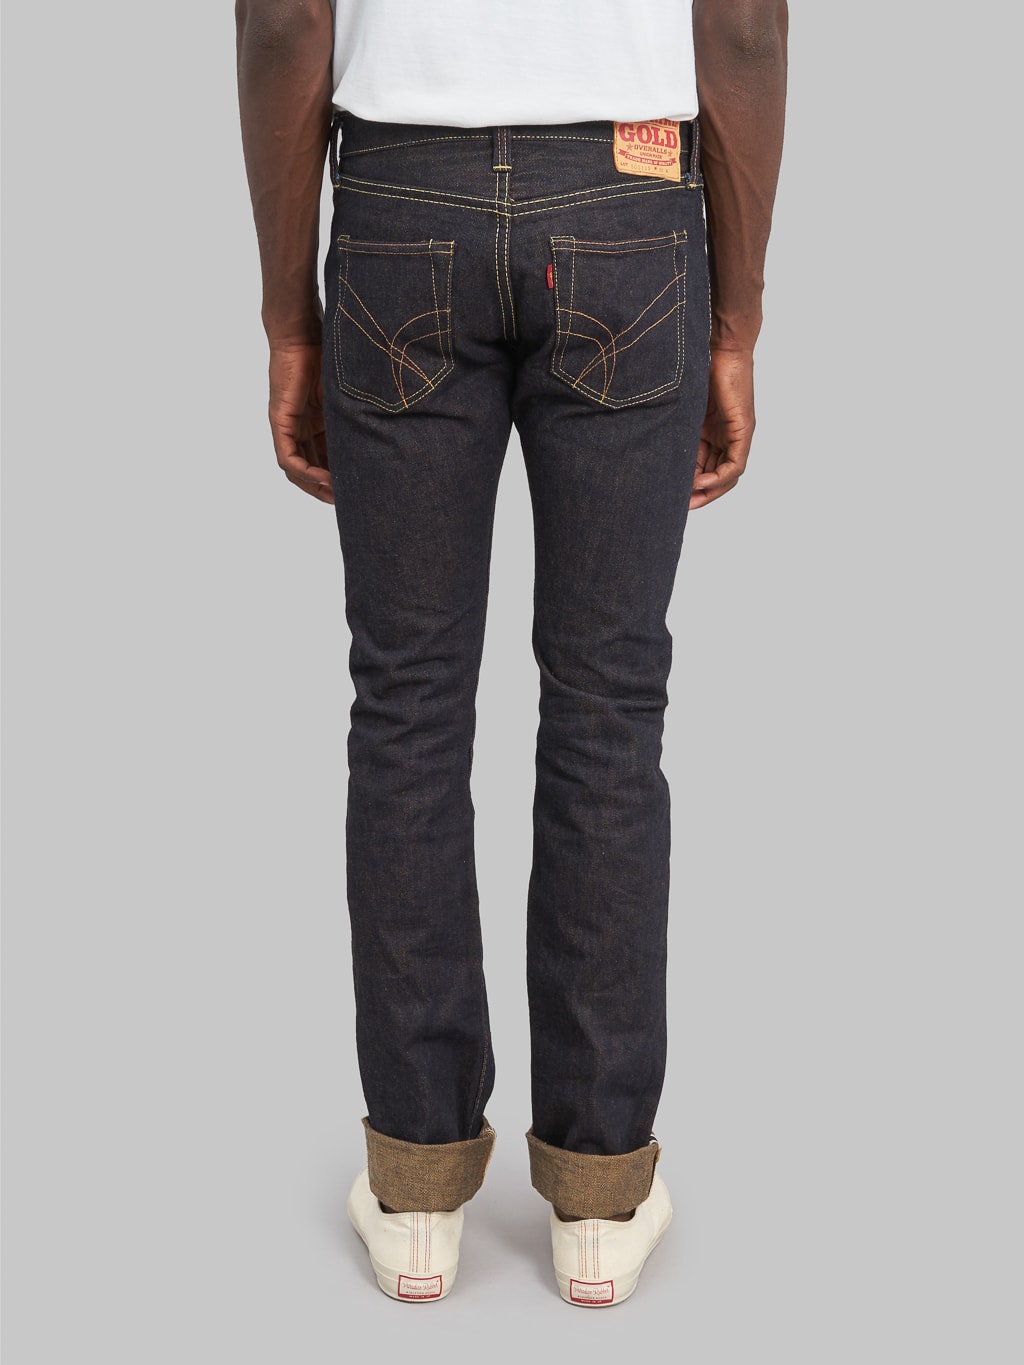 The Strike Gold 2109 Brown Weft Slim Tapered Jeans